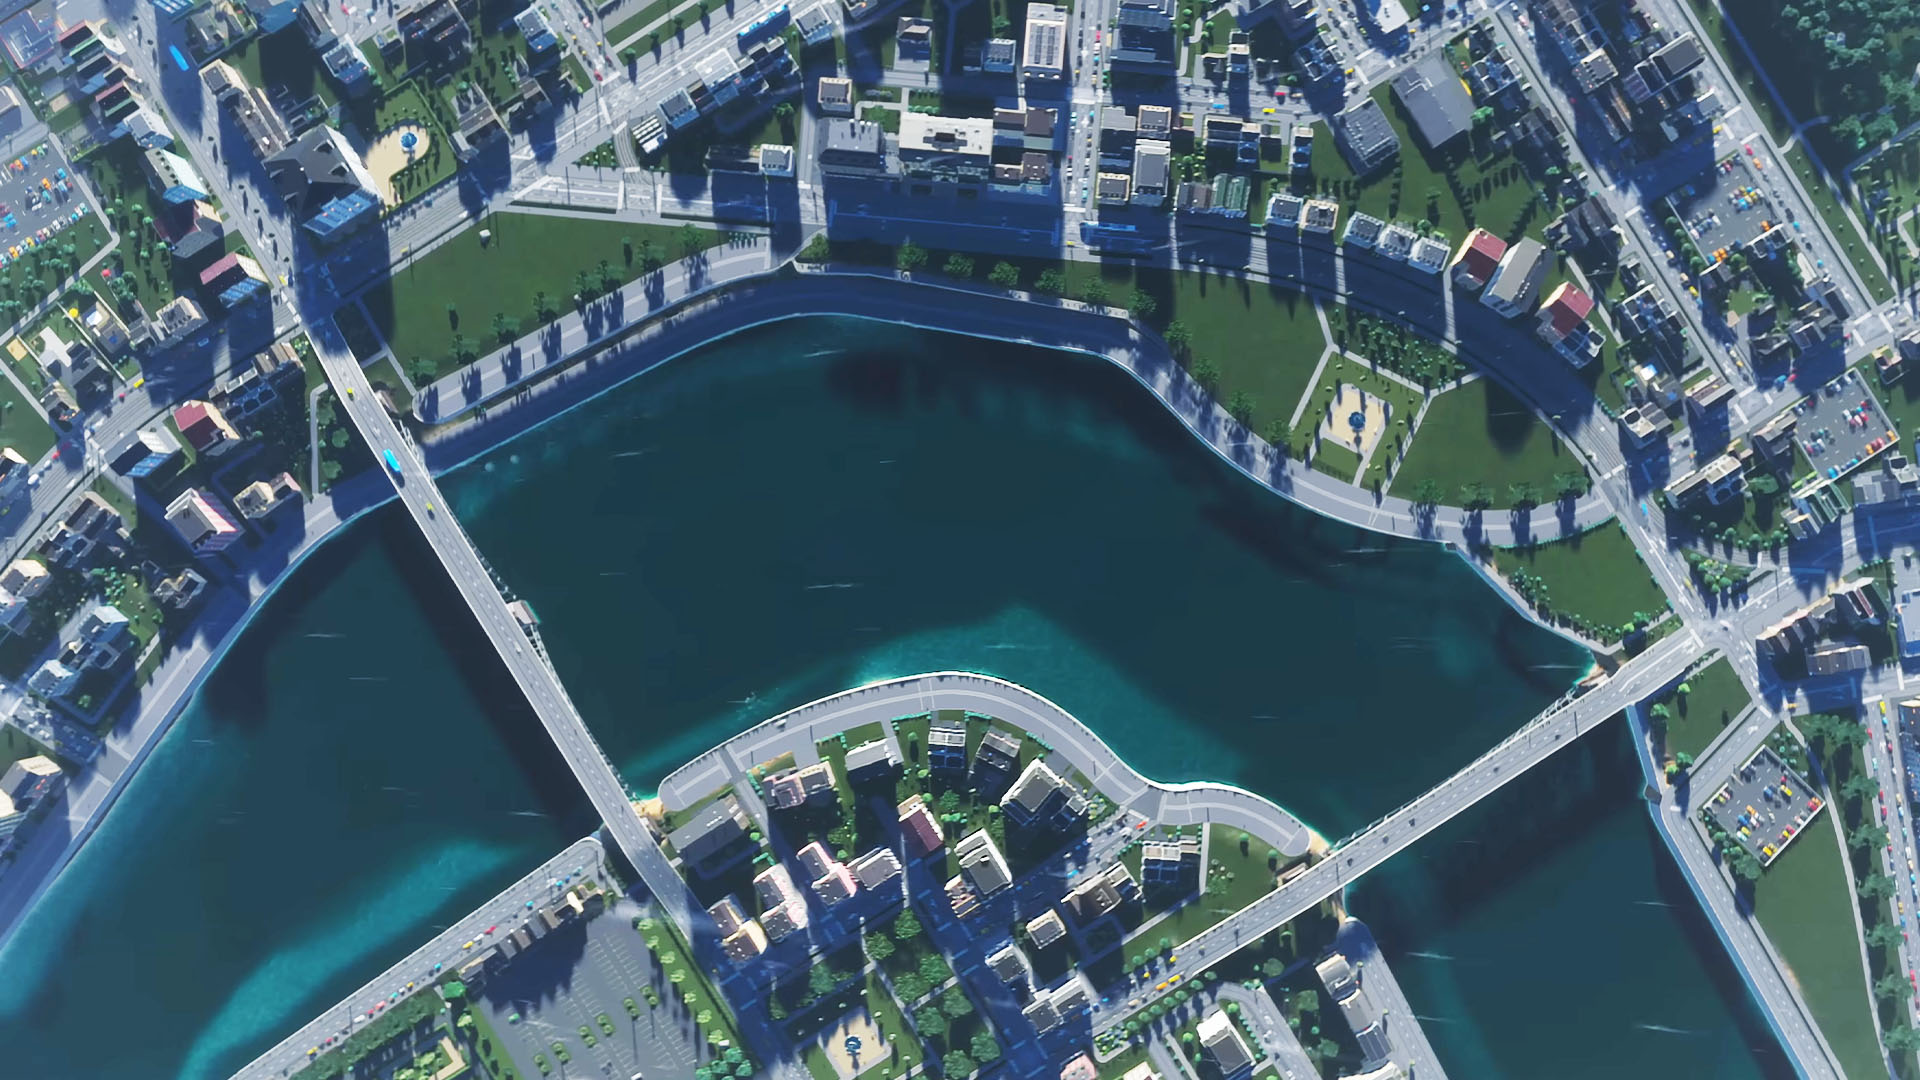 Cities: Skylines 2 hotfix 1.0.11f1 patch notes: First round of